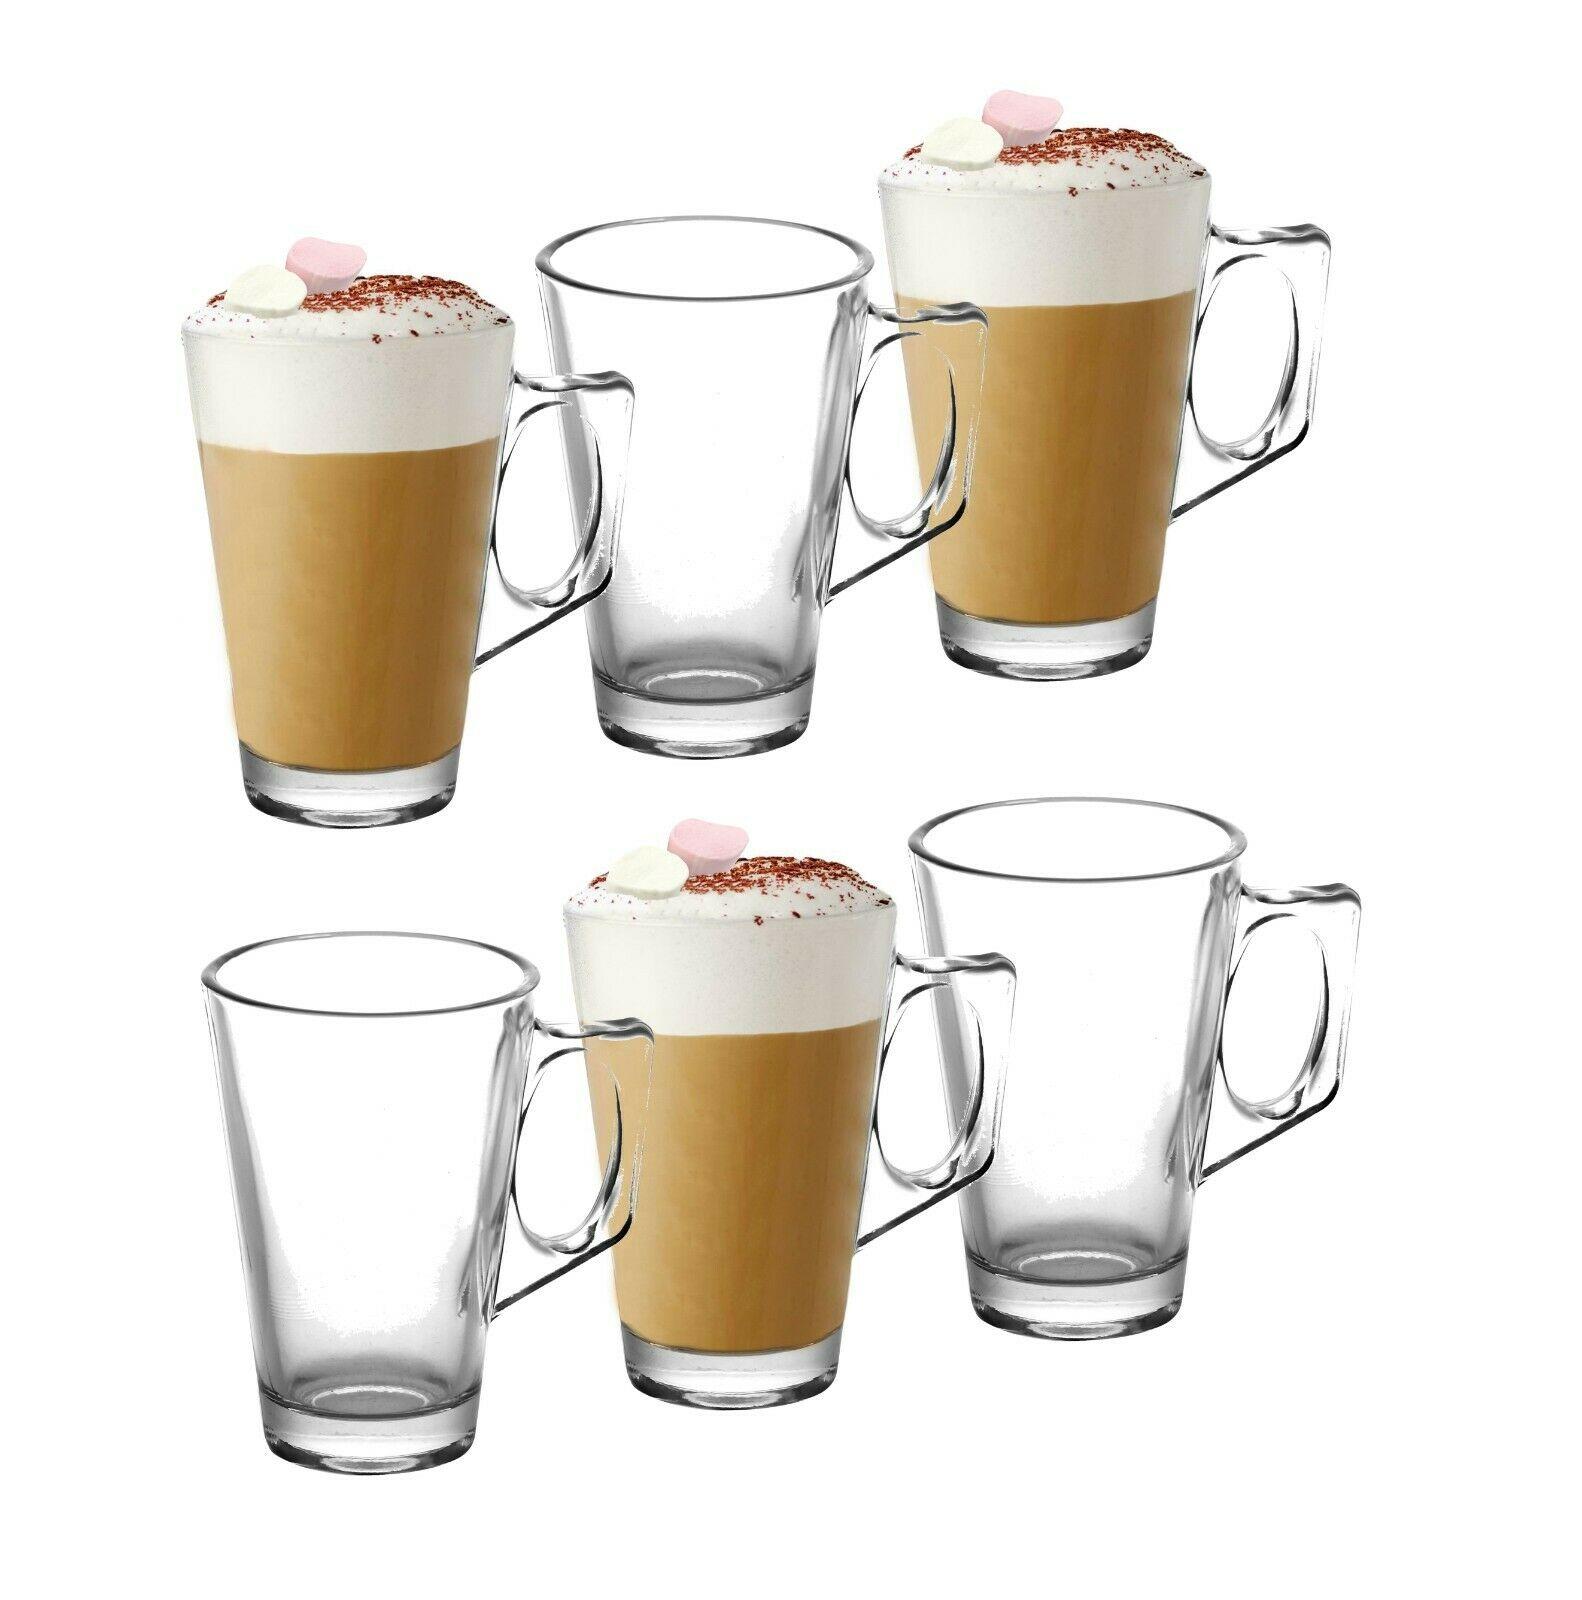 YöL Latte Glasses Set of 4 Clear Tall Coffee Cups Large 300ml Durable Hot Chocolate Drinks Barrista Machine Compatible